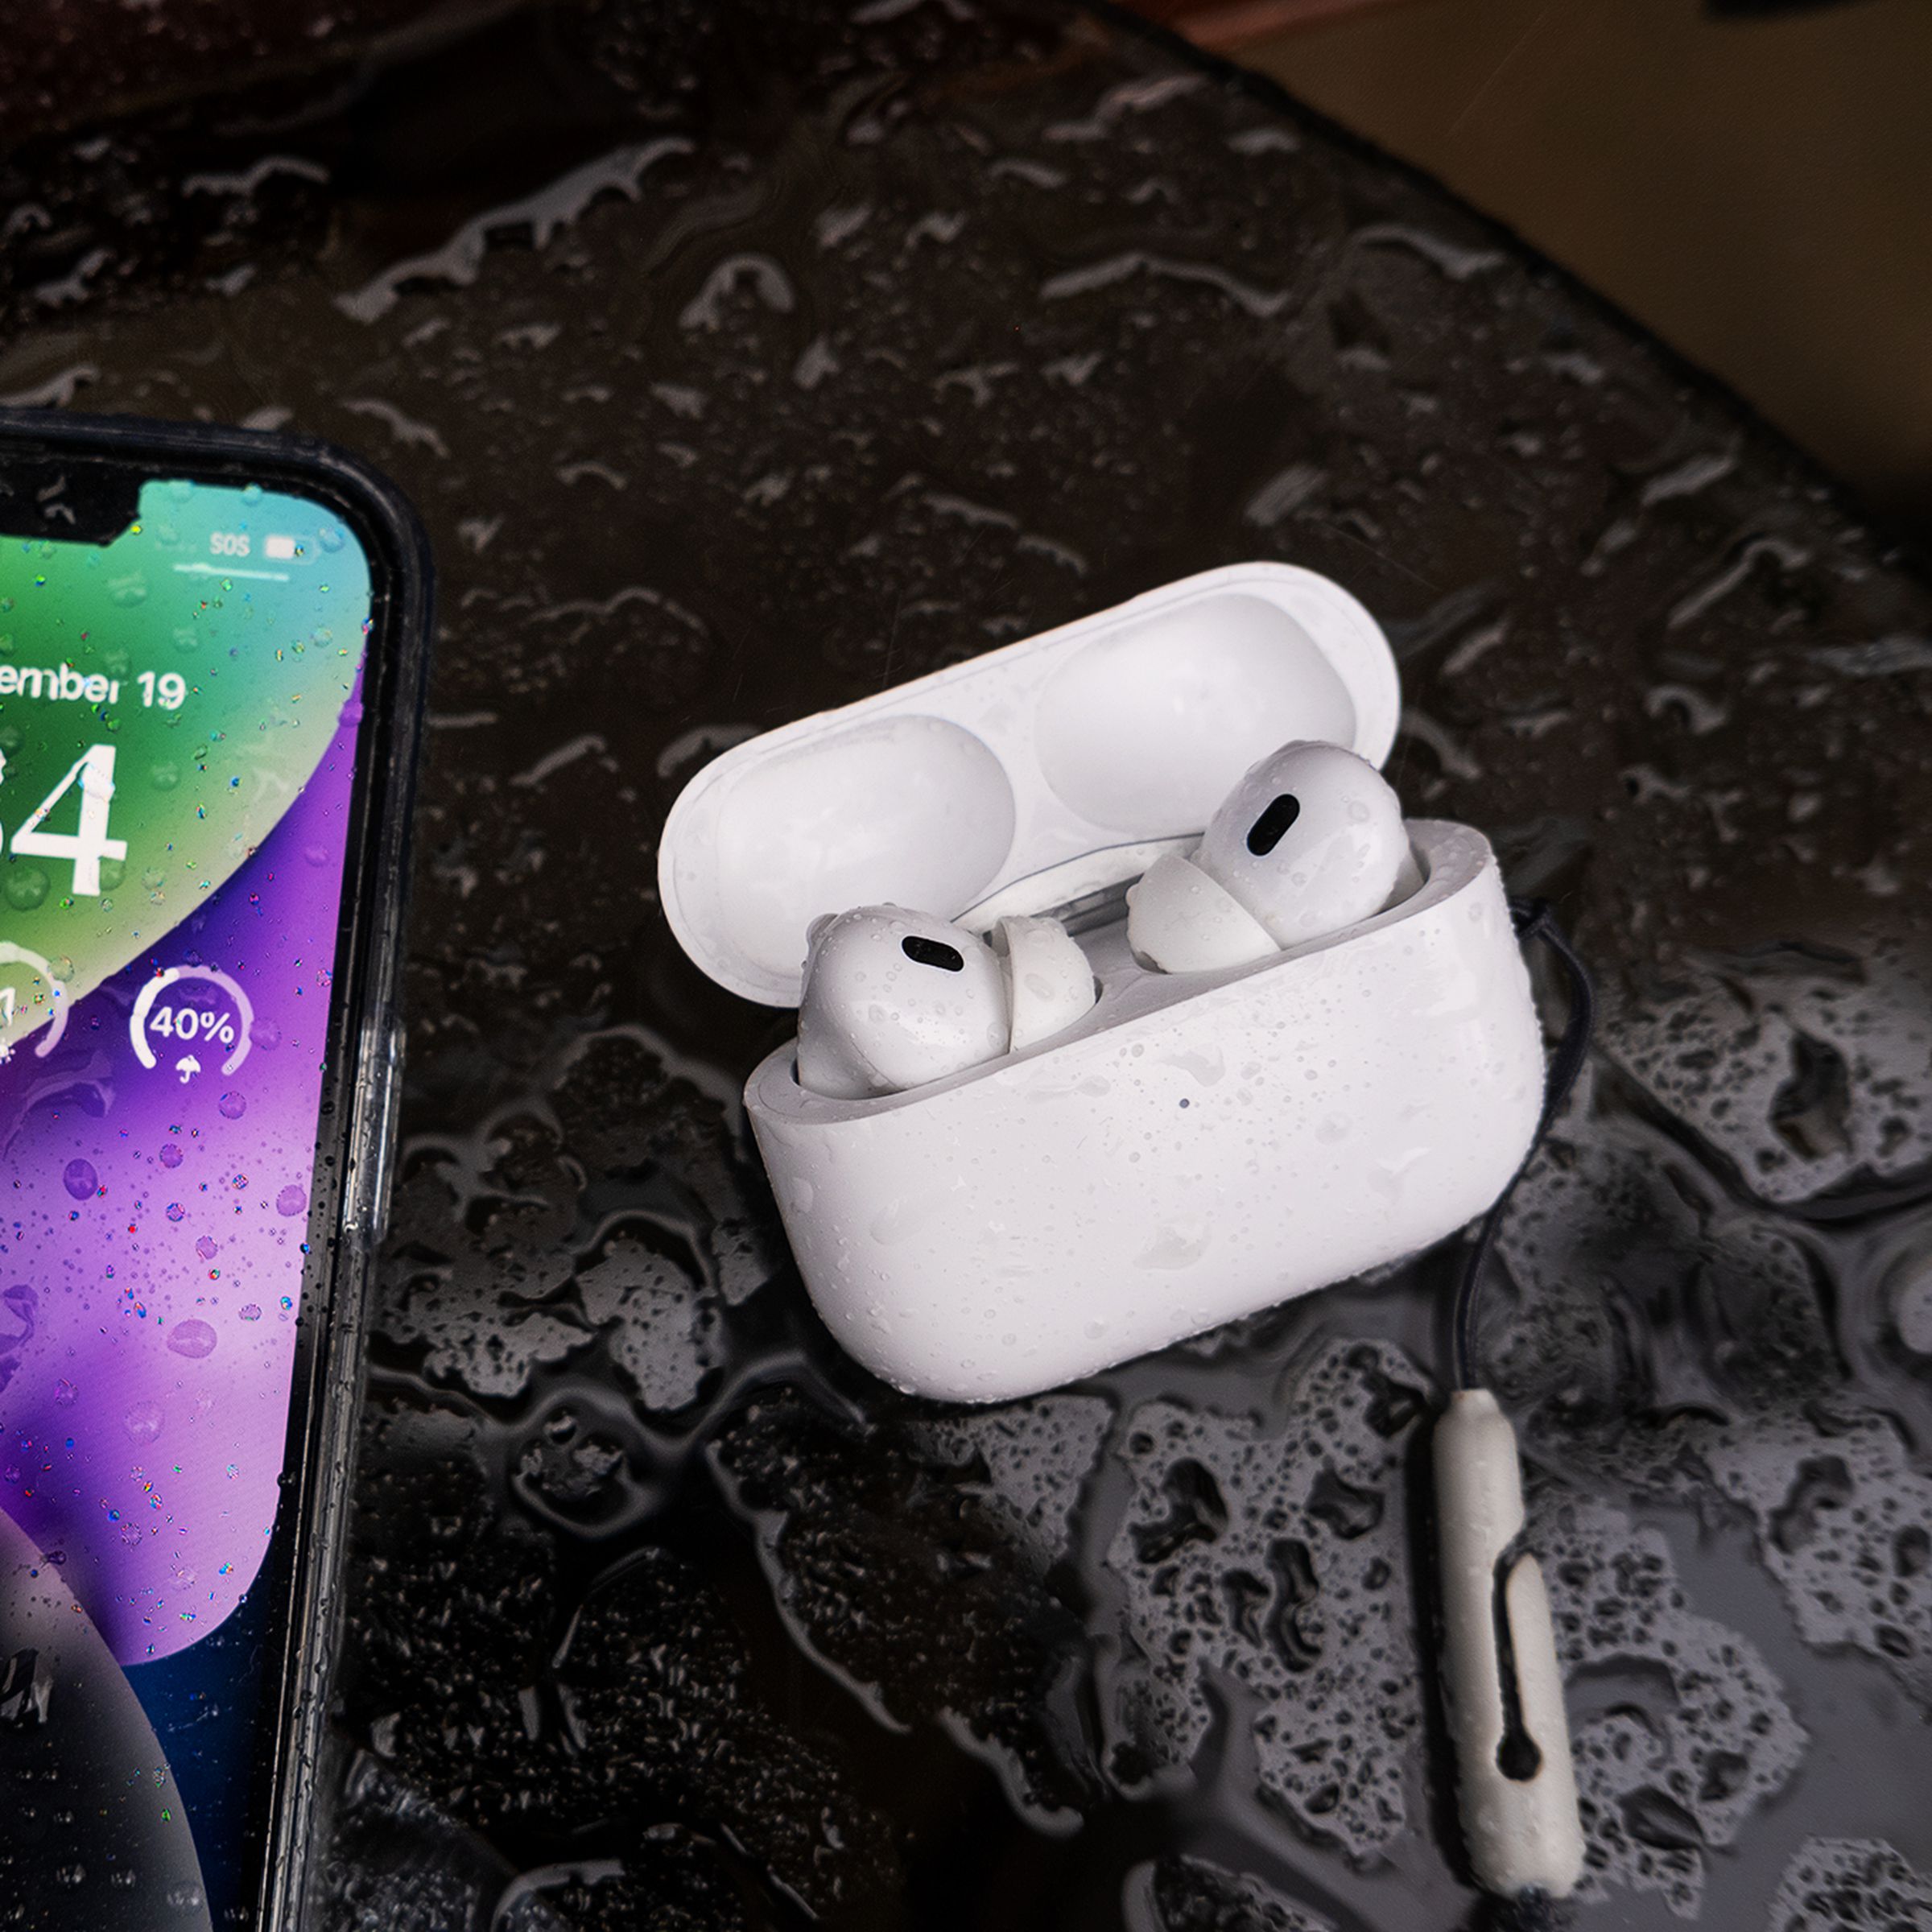 A photo of the iPhone 14 next to Apple’s second-generation AirPods Pro. Both devices are wet with visible raindrops on them.